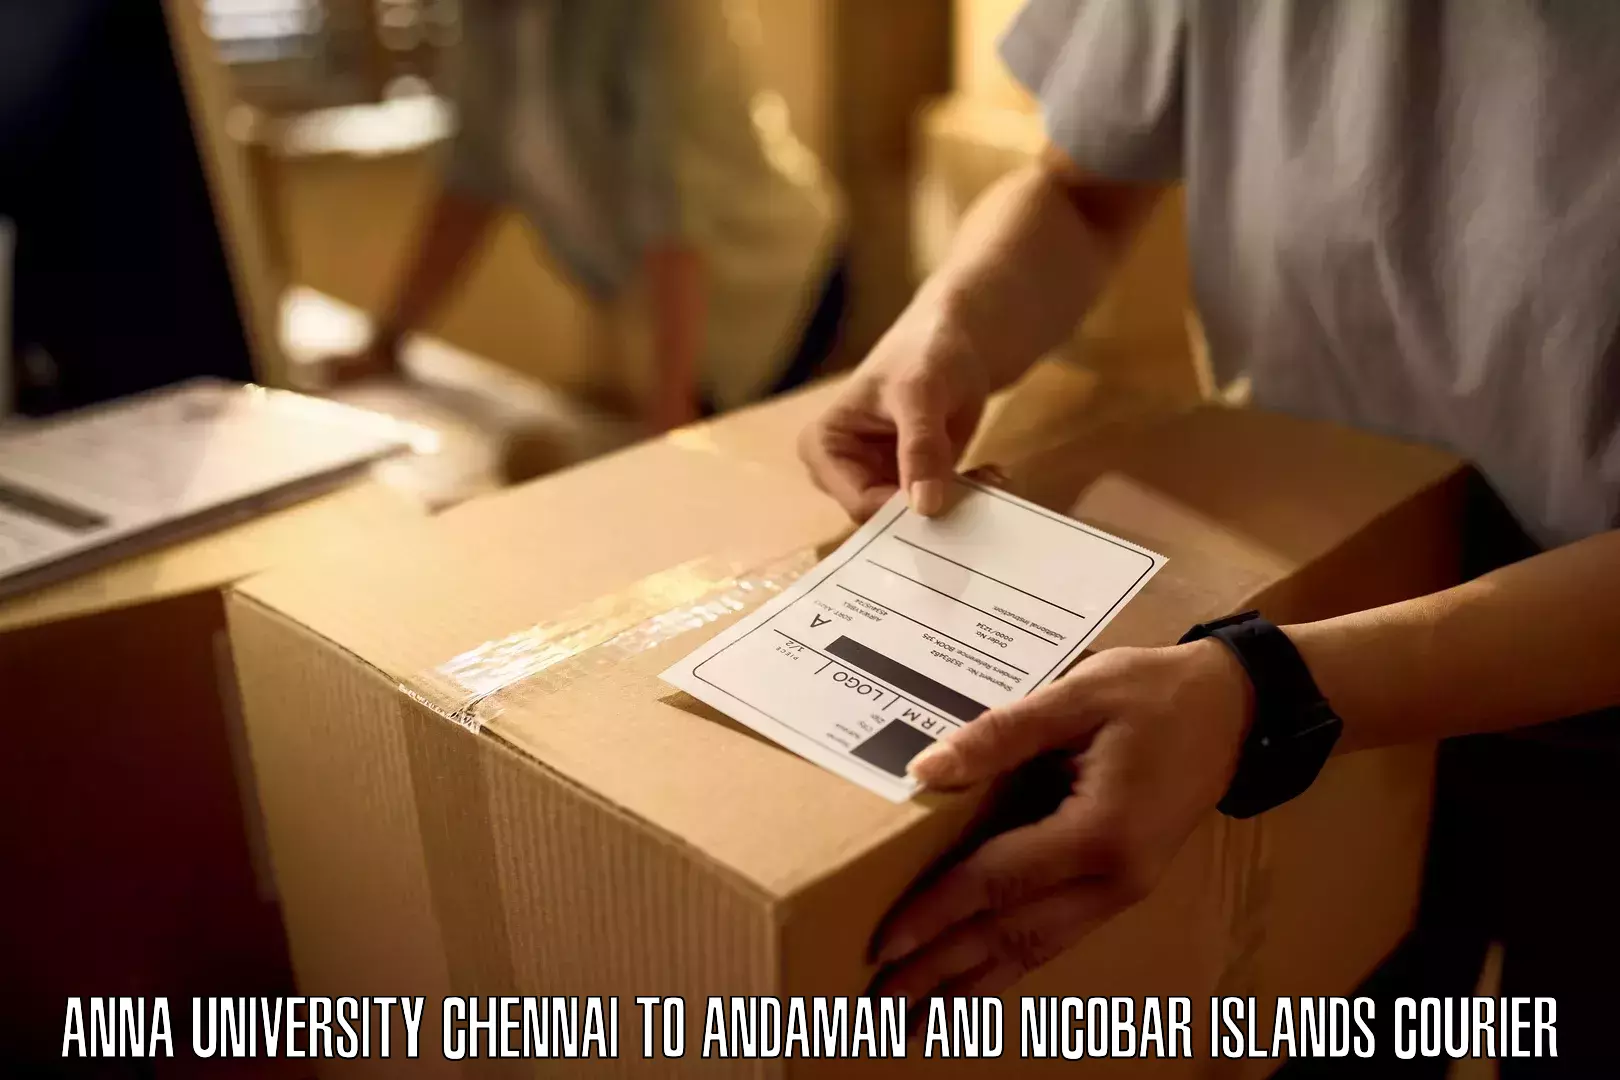 End-to-end delivery Anna University Chennai to Port Blair